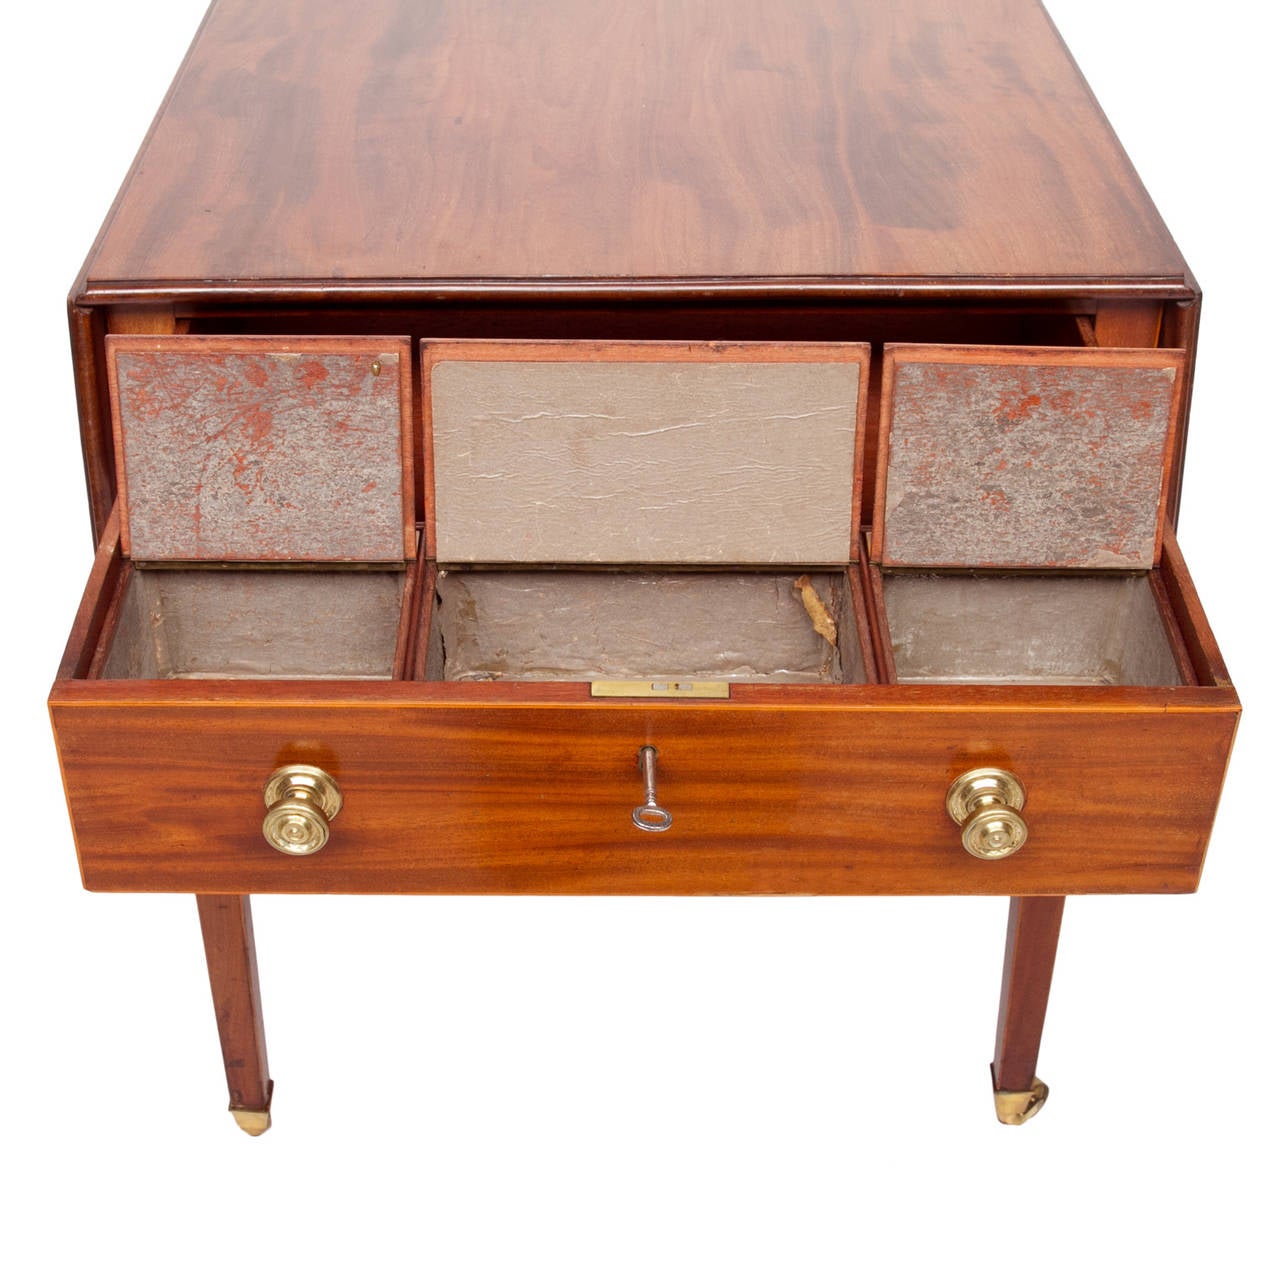 Sheraton 19th Century English Pembroke Table with Tea Caddies in the Drawers